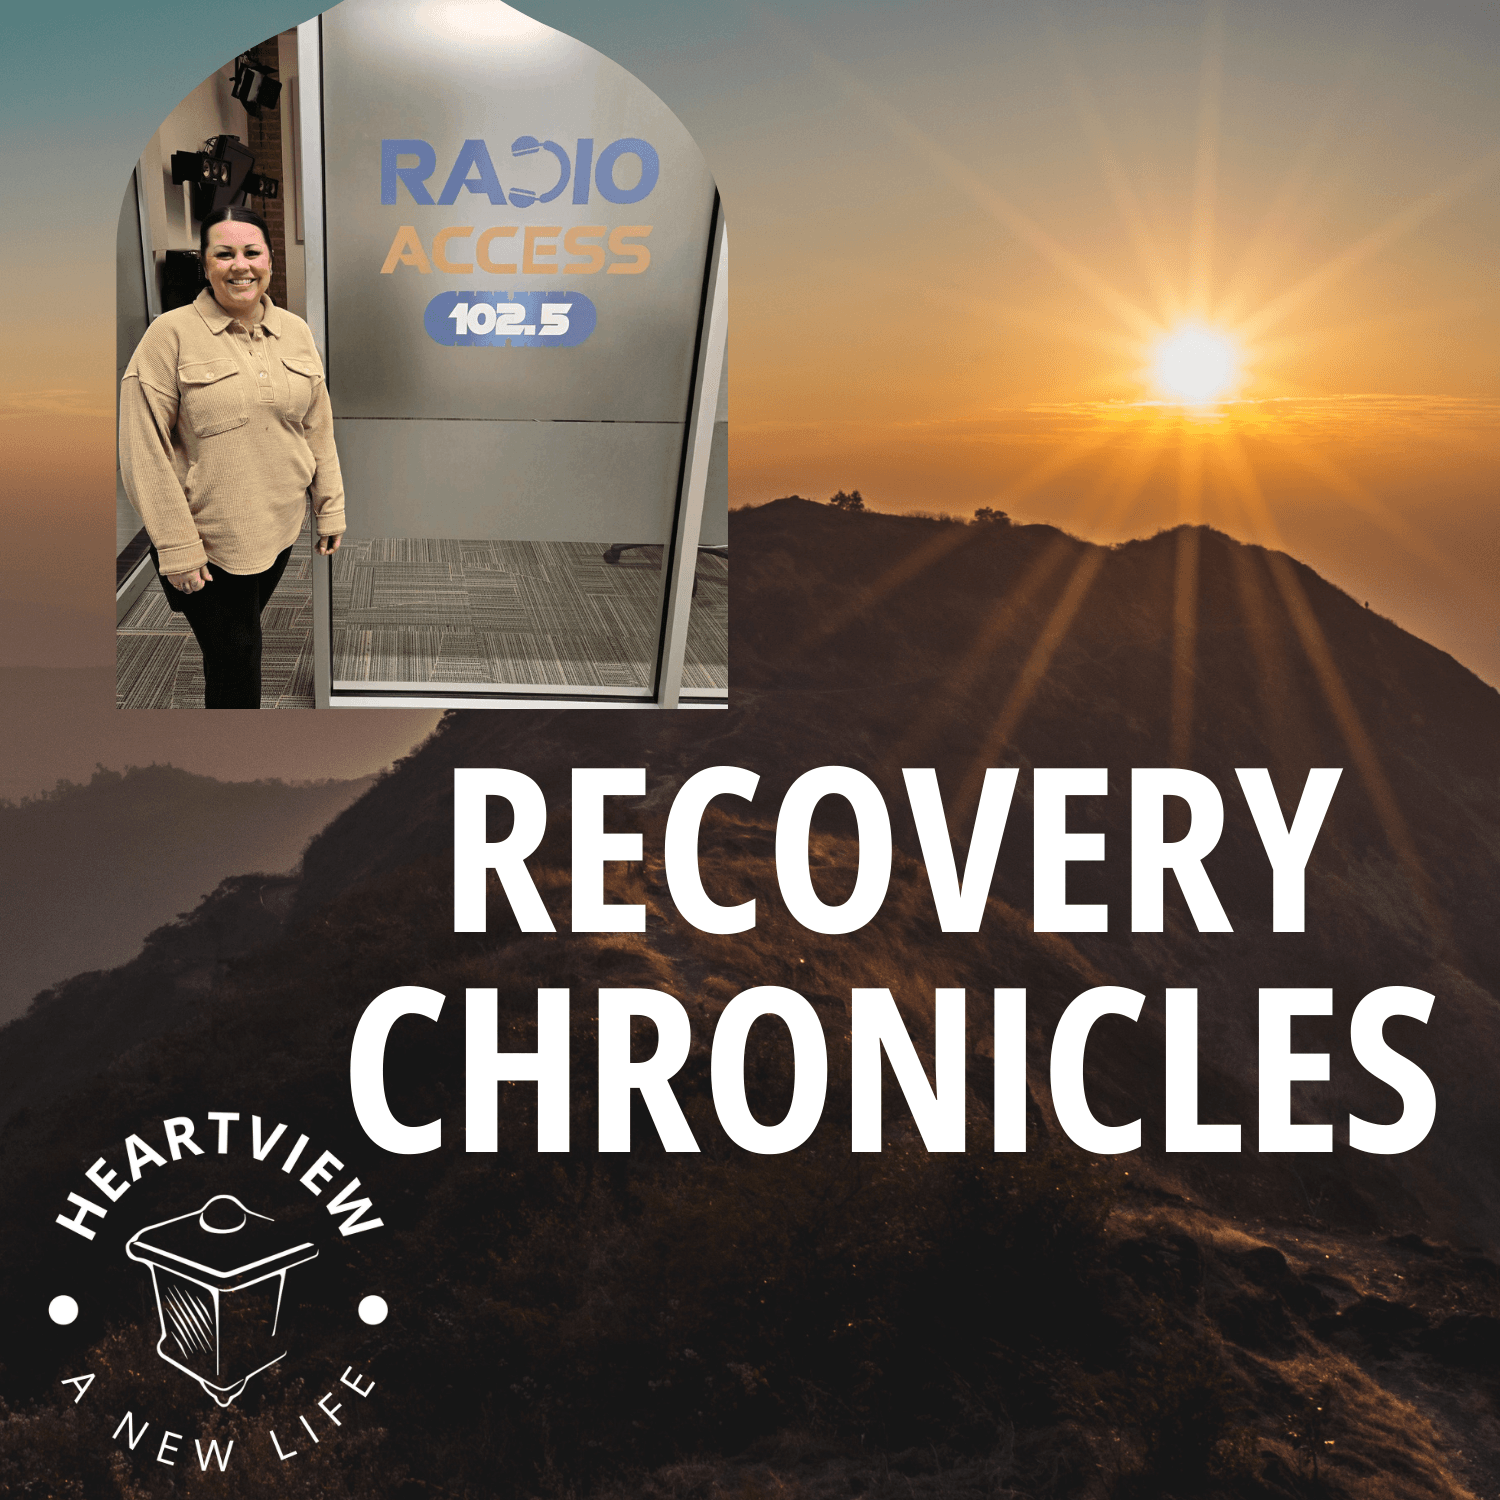 Recovery Chronicles Podcast Relaunches